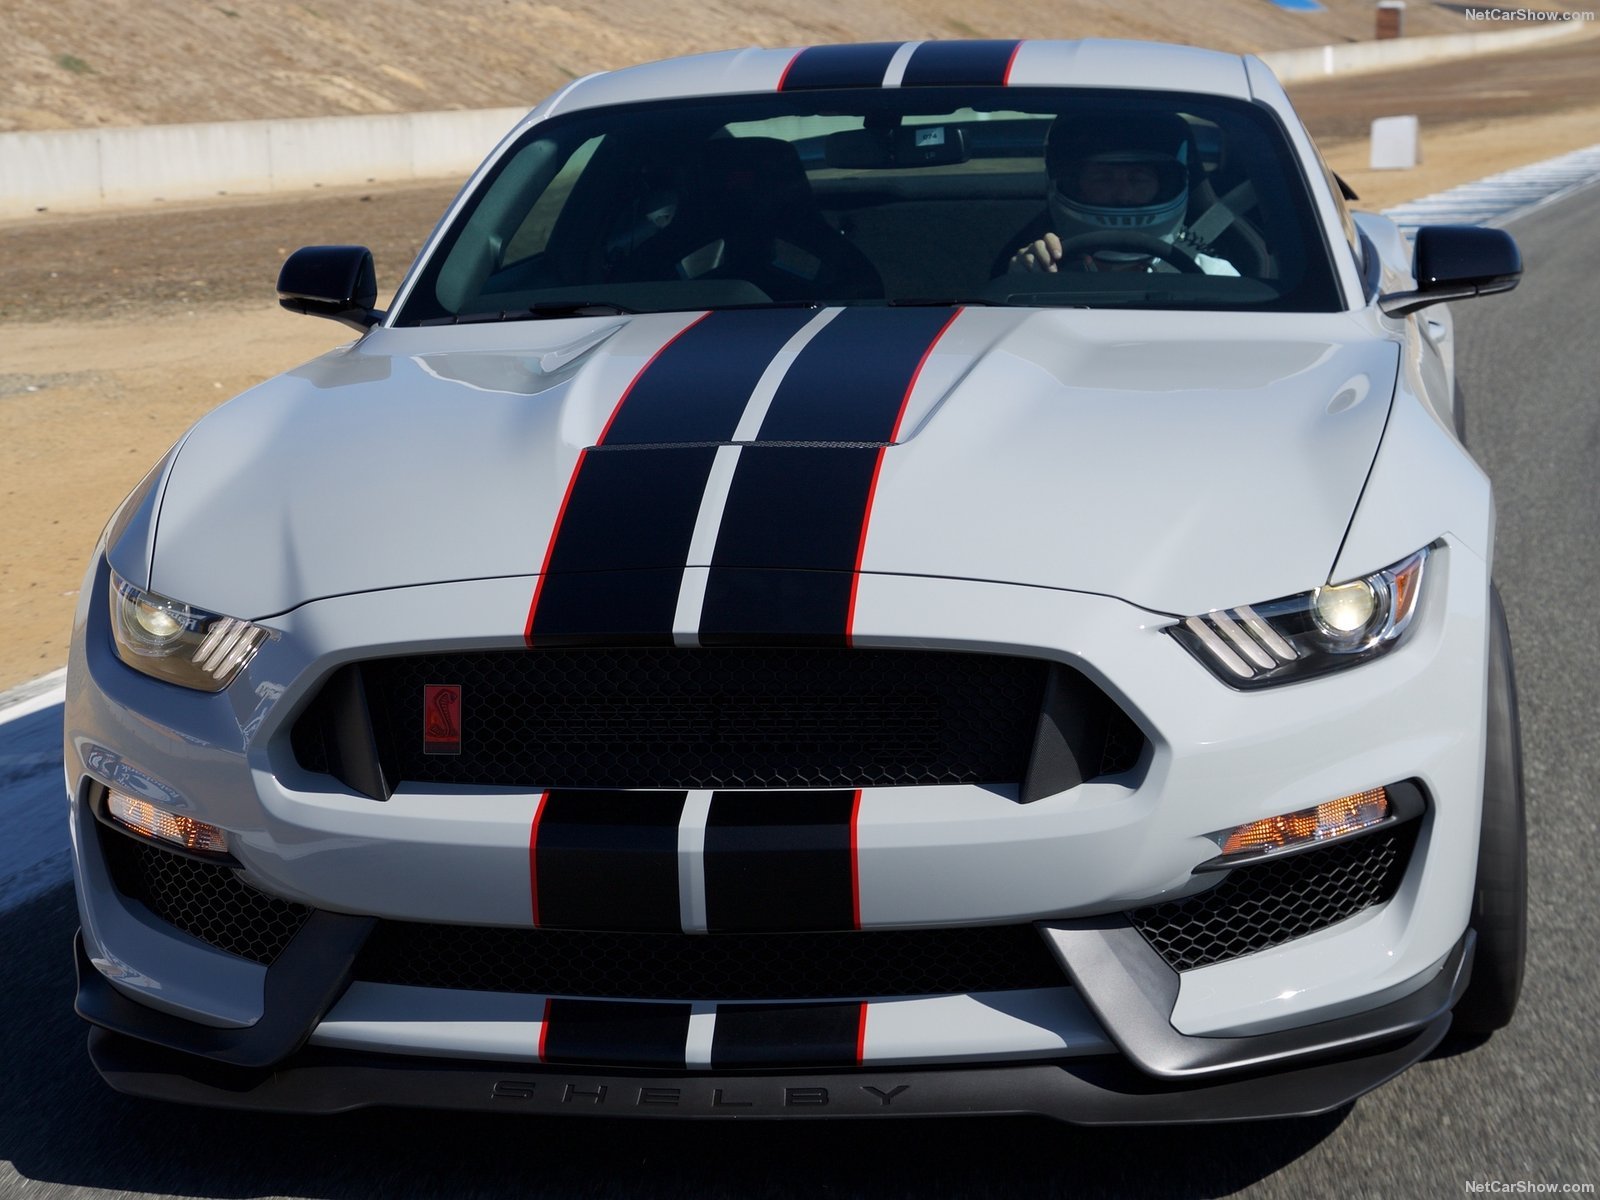 2015, Cars, Ford, Gt350r, Mustang, Shelby, Usa Wallpaper